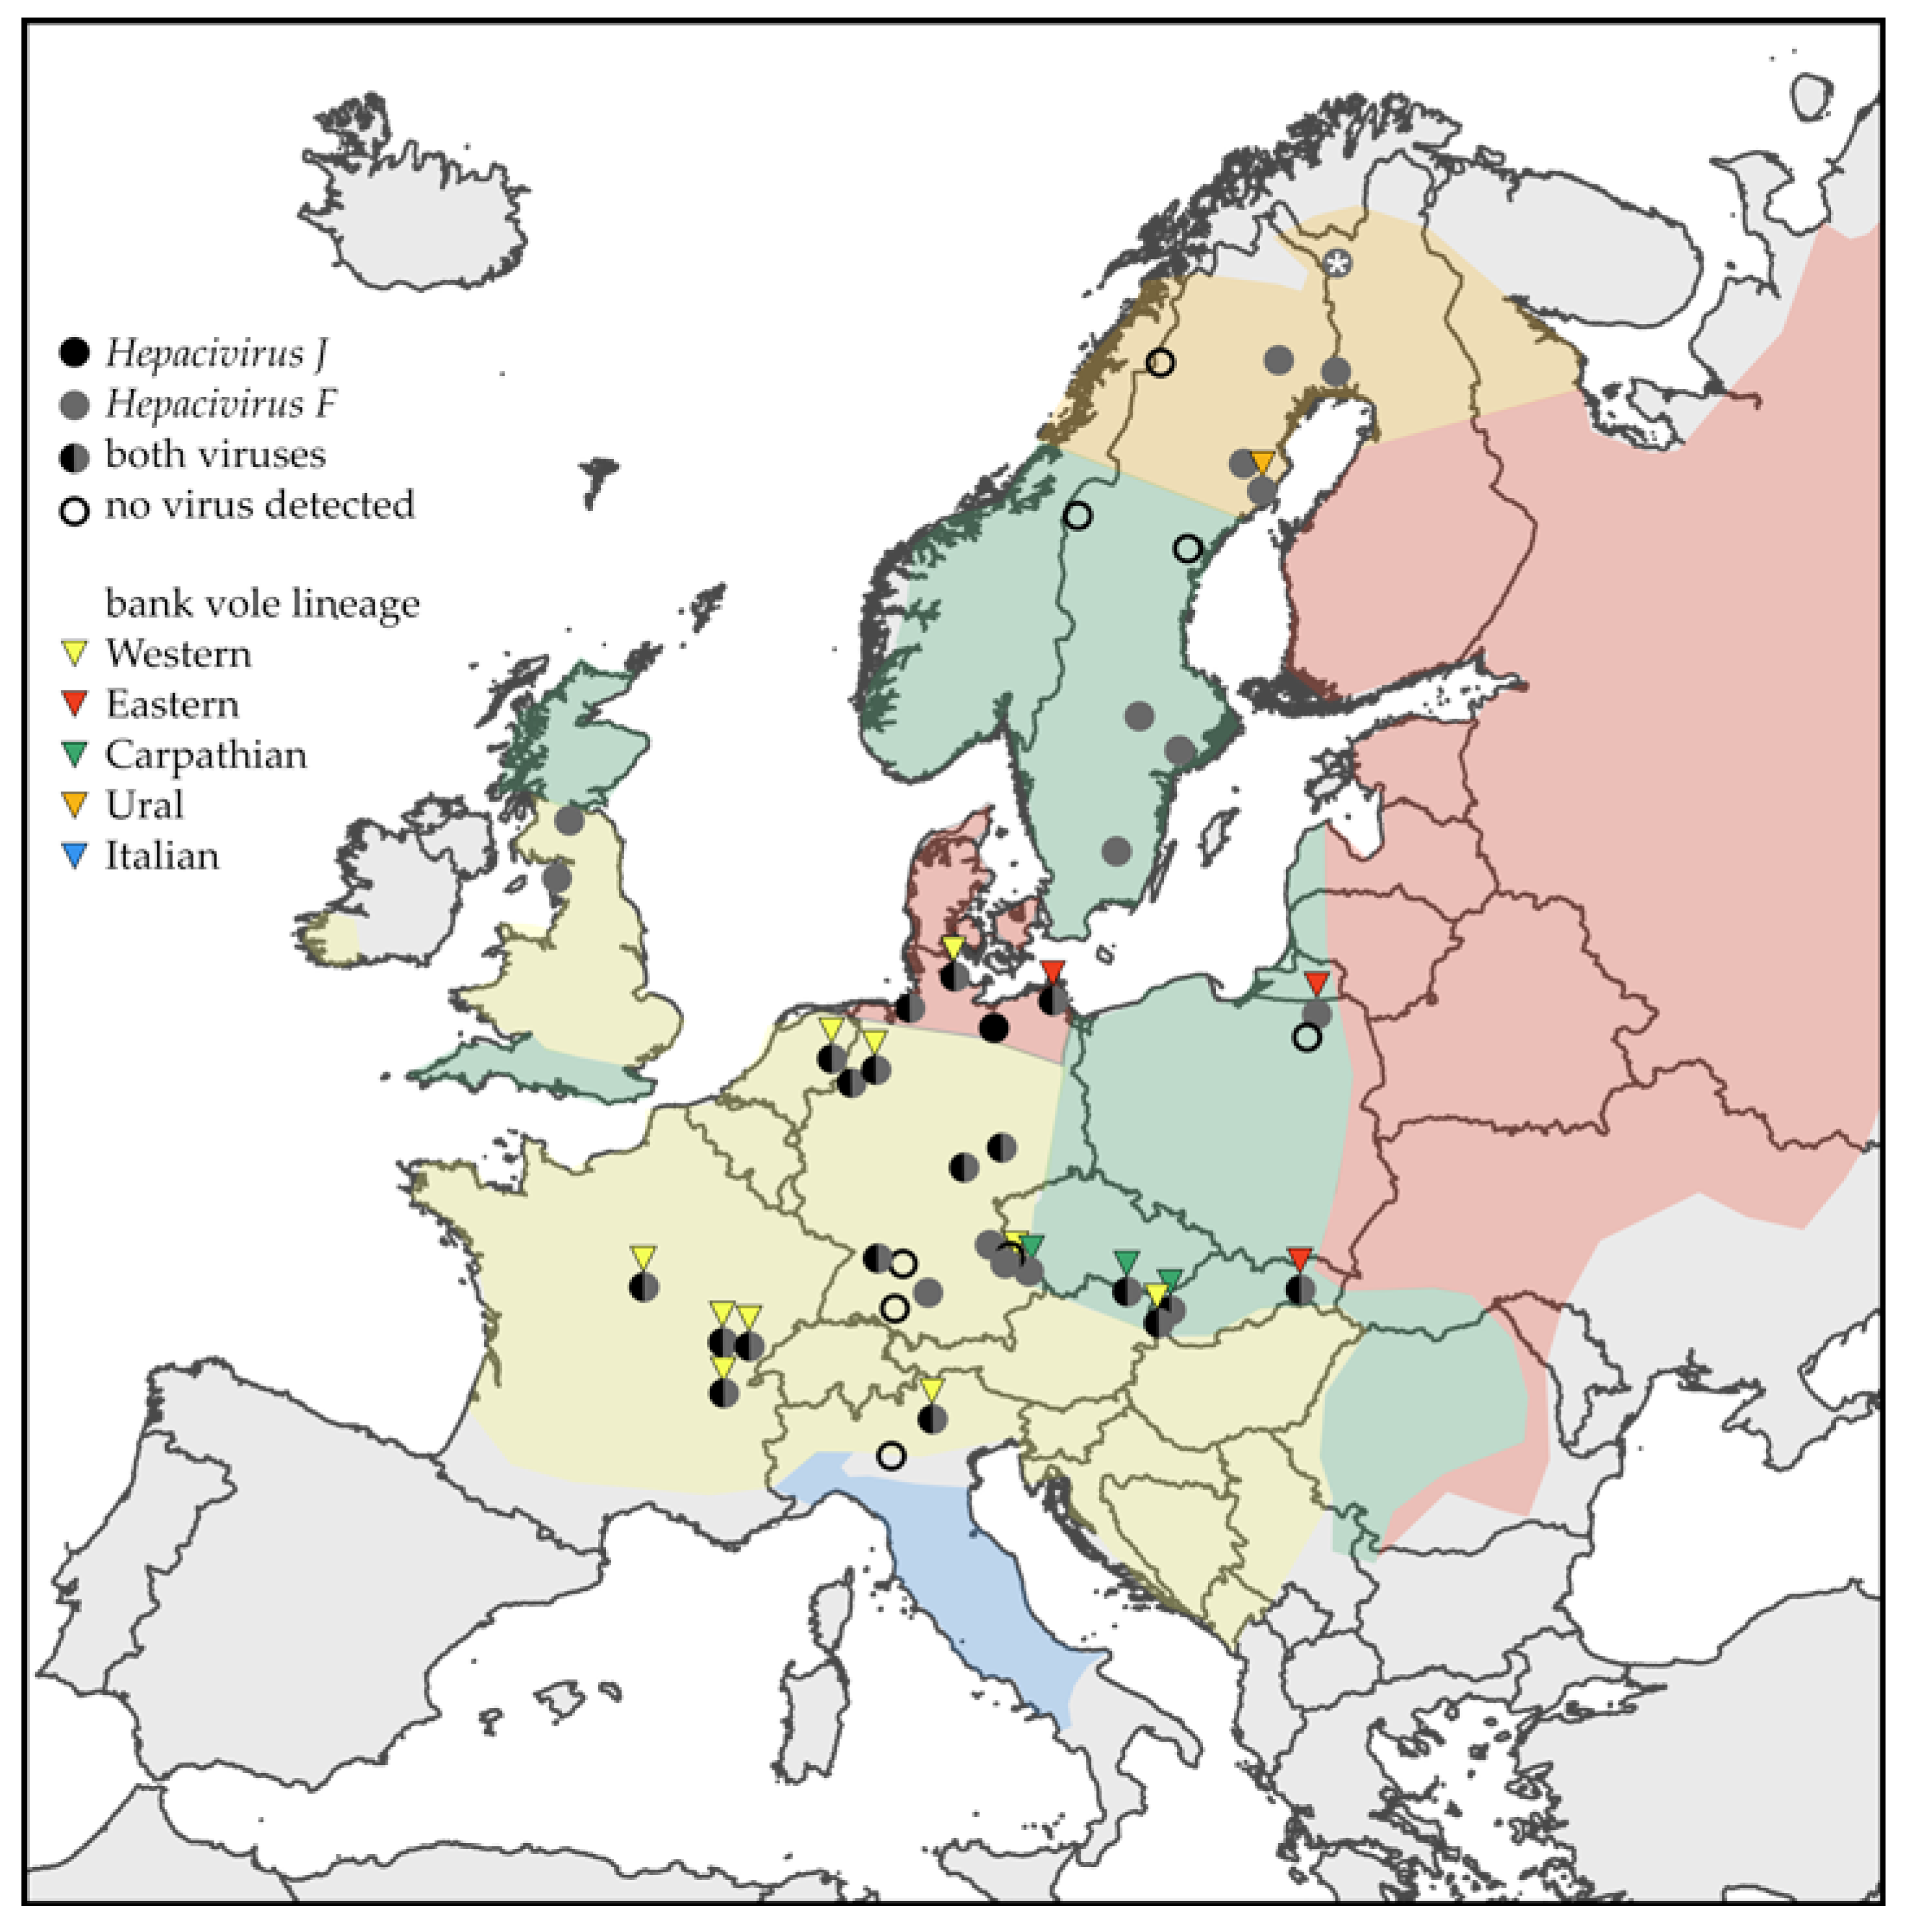 Viruses | Free Full-Text | Geographical Distribution and Genetic Diversity  of Bank Vole Hepaciviruses in Europe